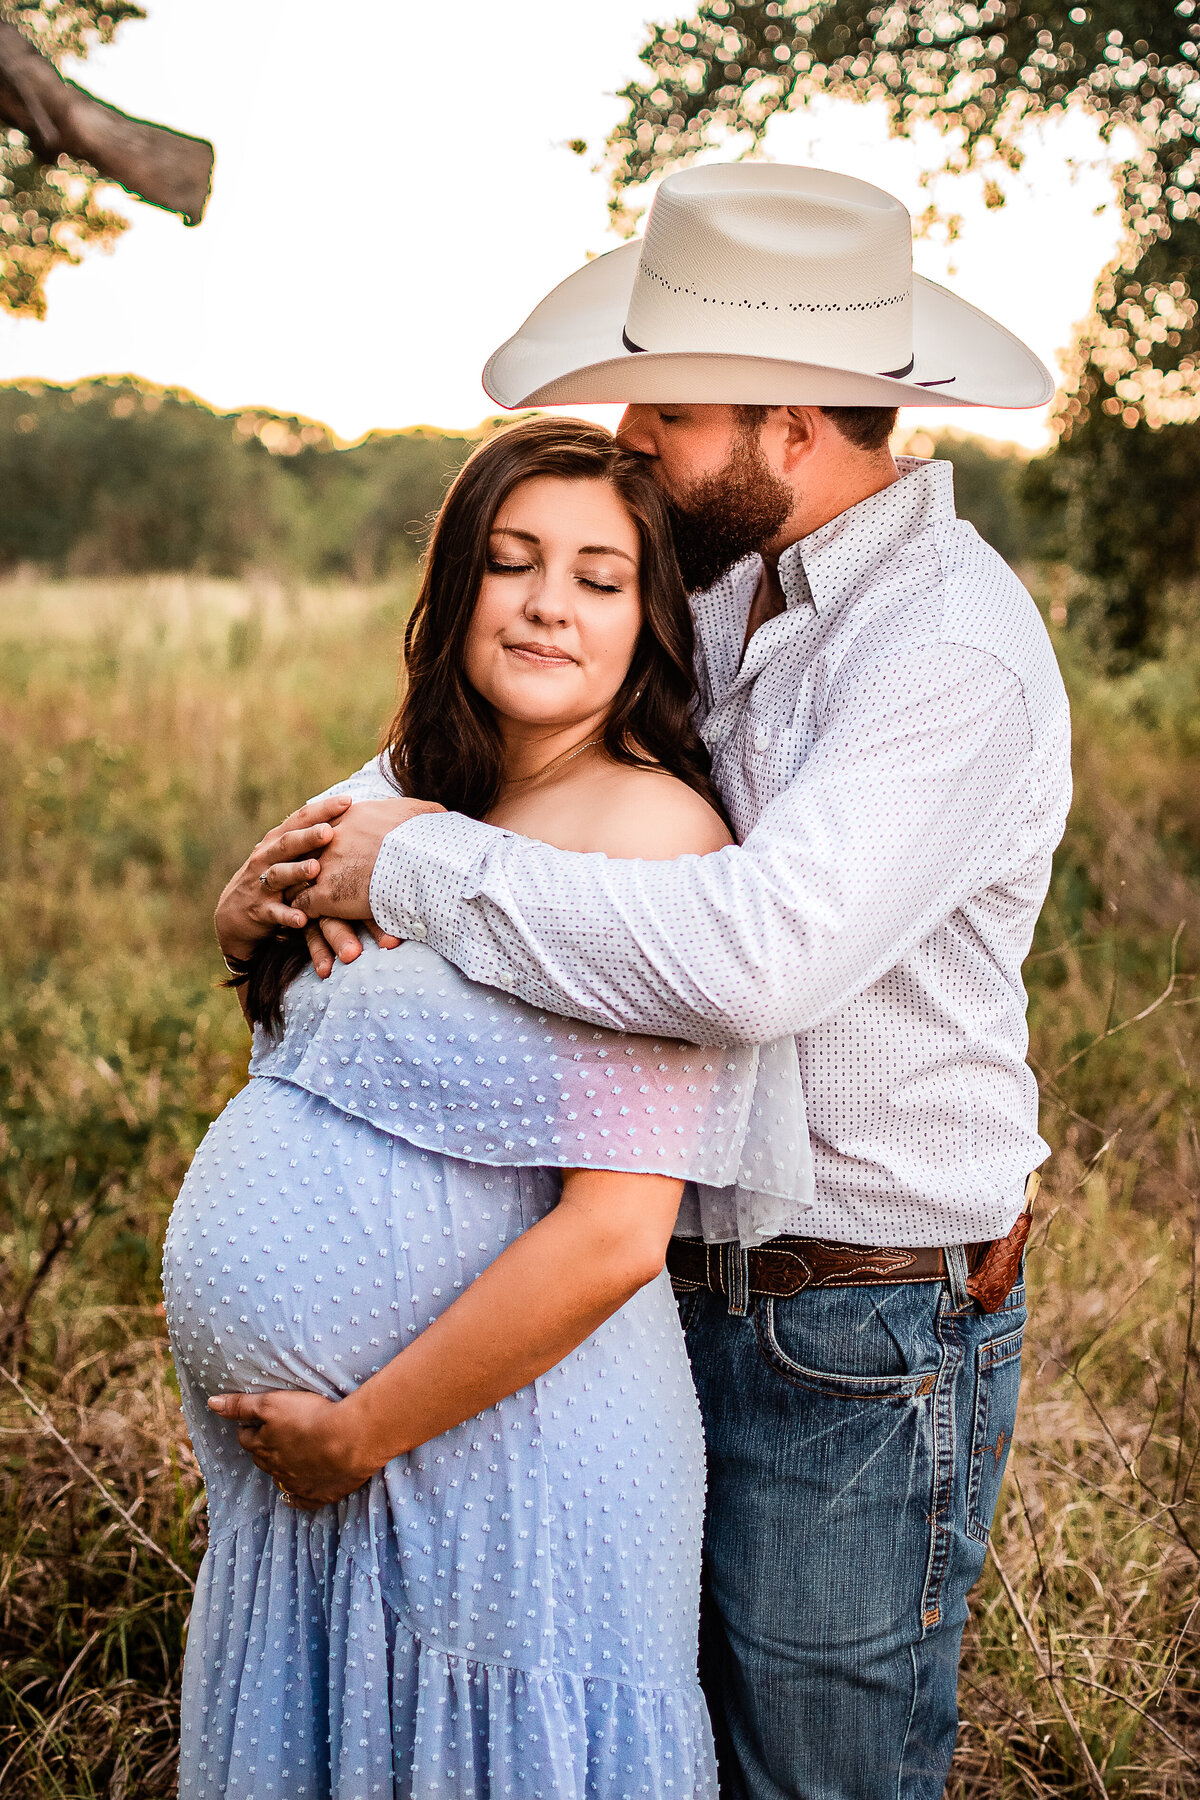 A husband hugs his pregnant wife from behind while he kisses her forehead.